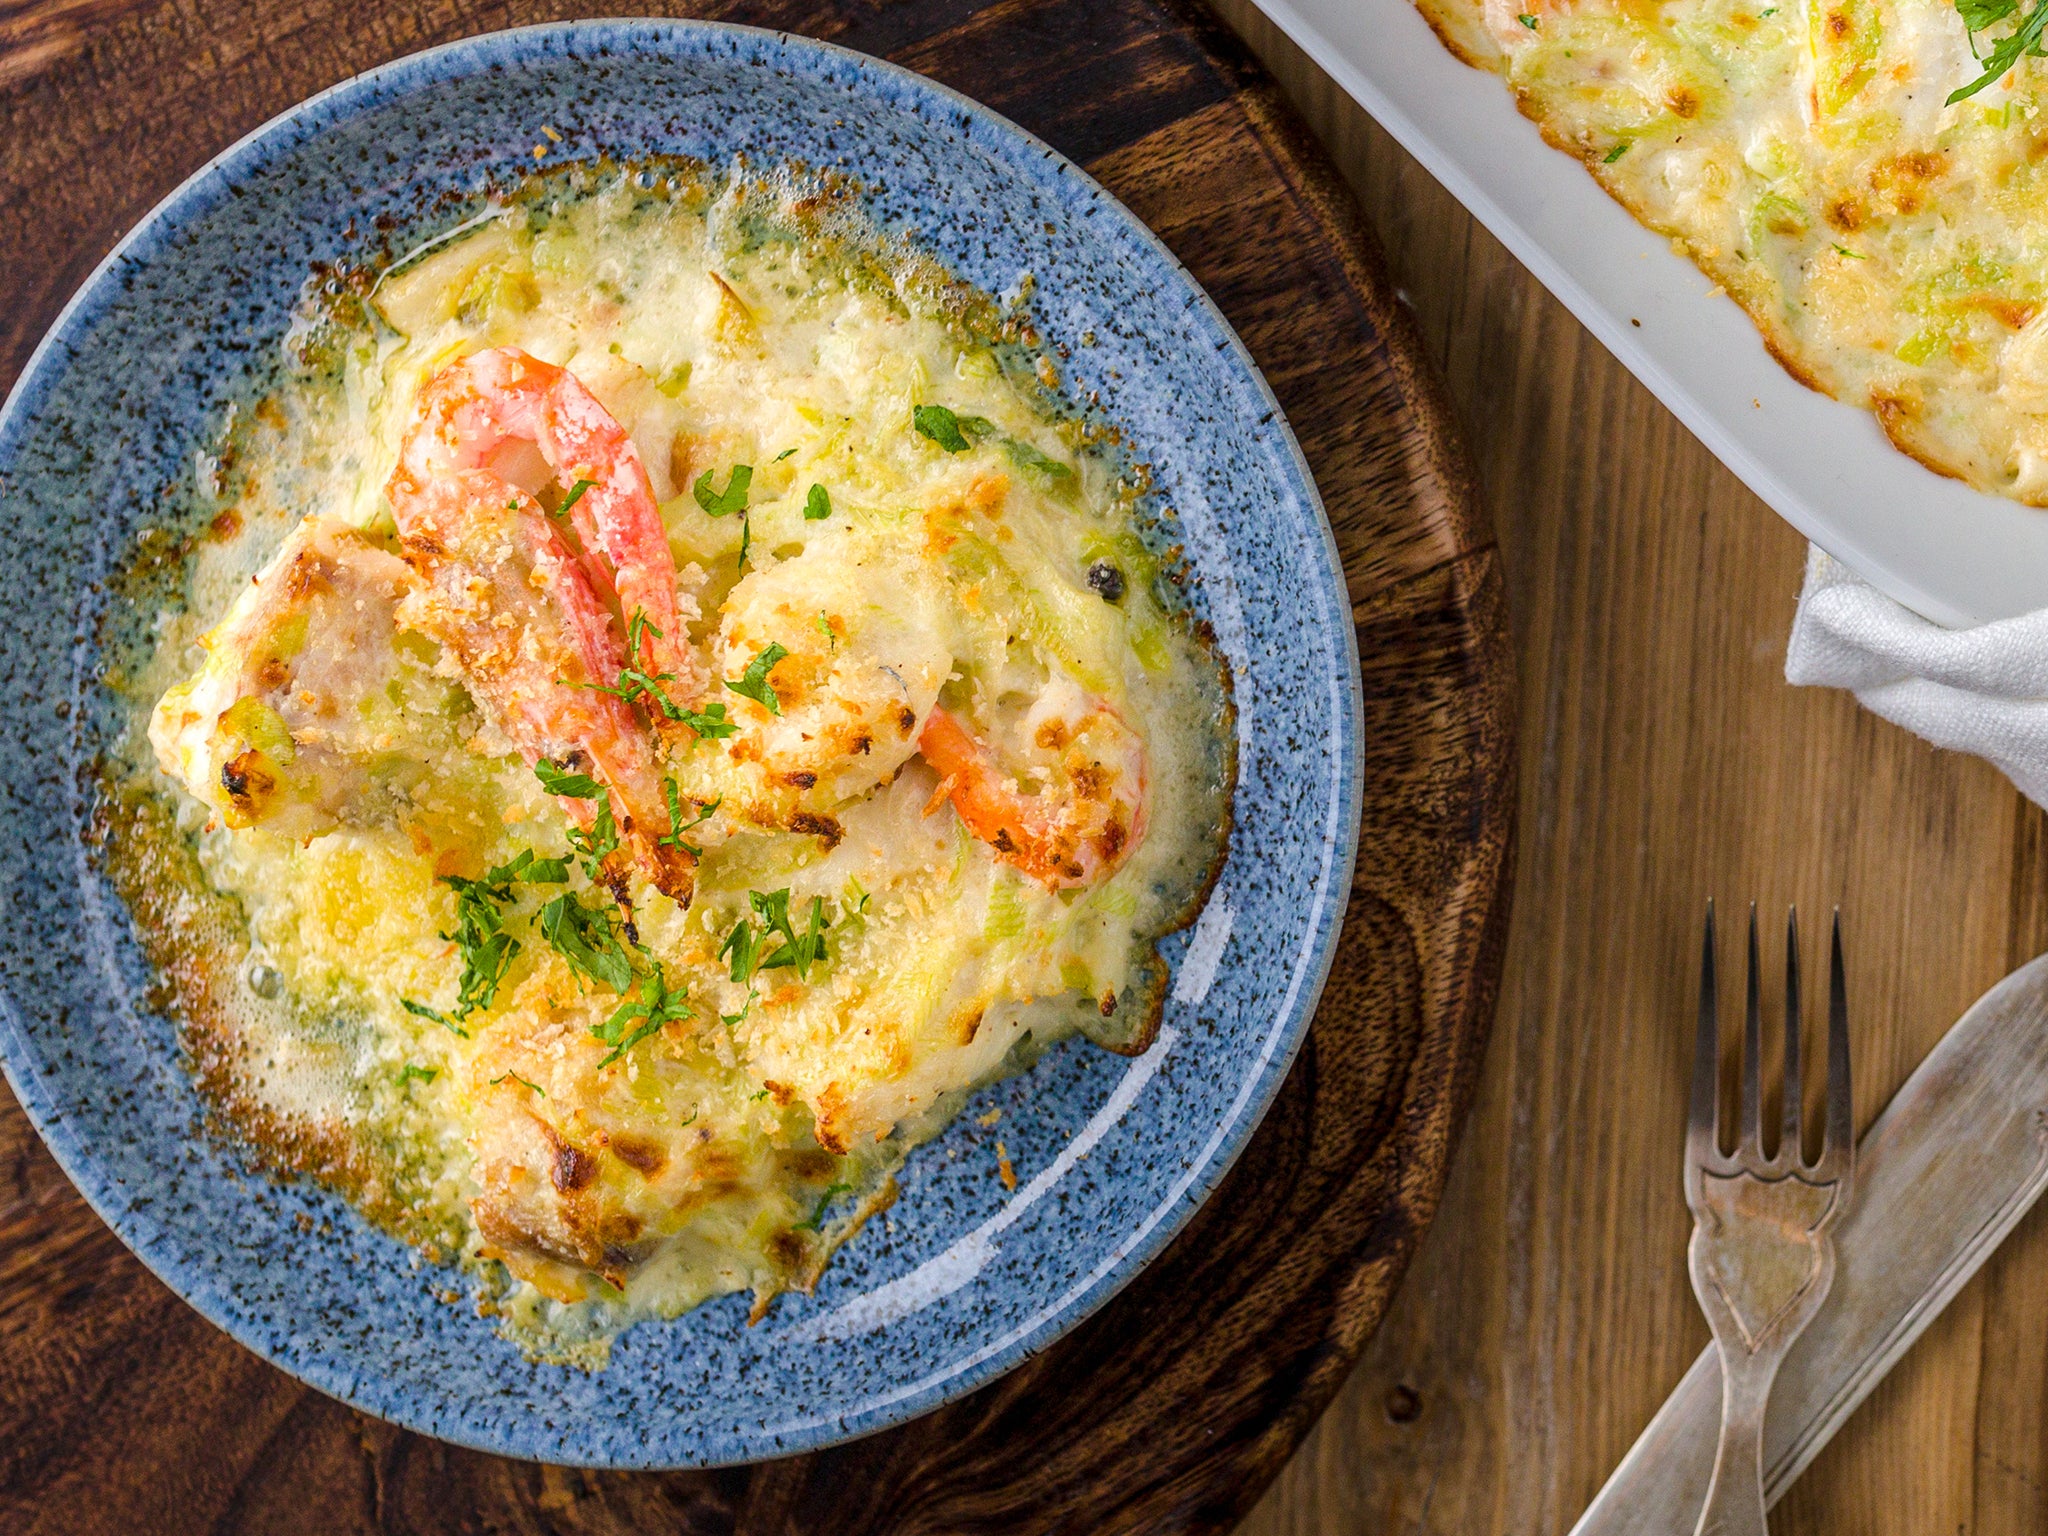 No time for pie? Try this gratin instead